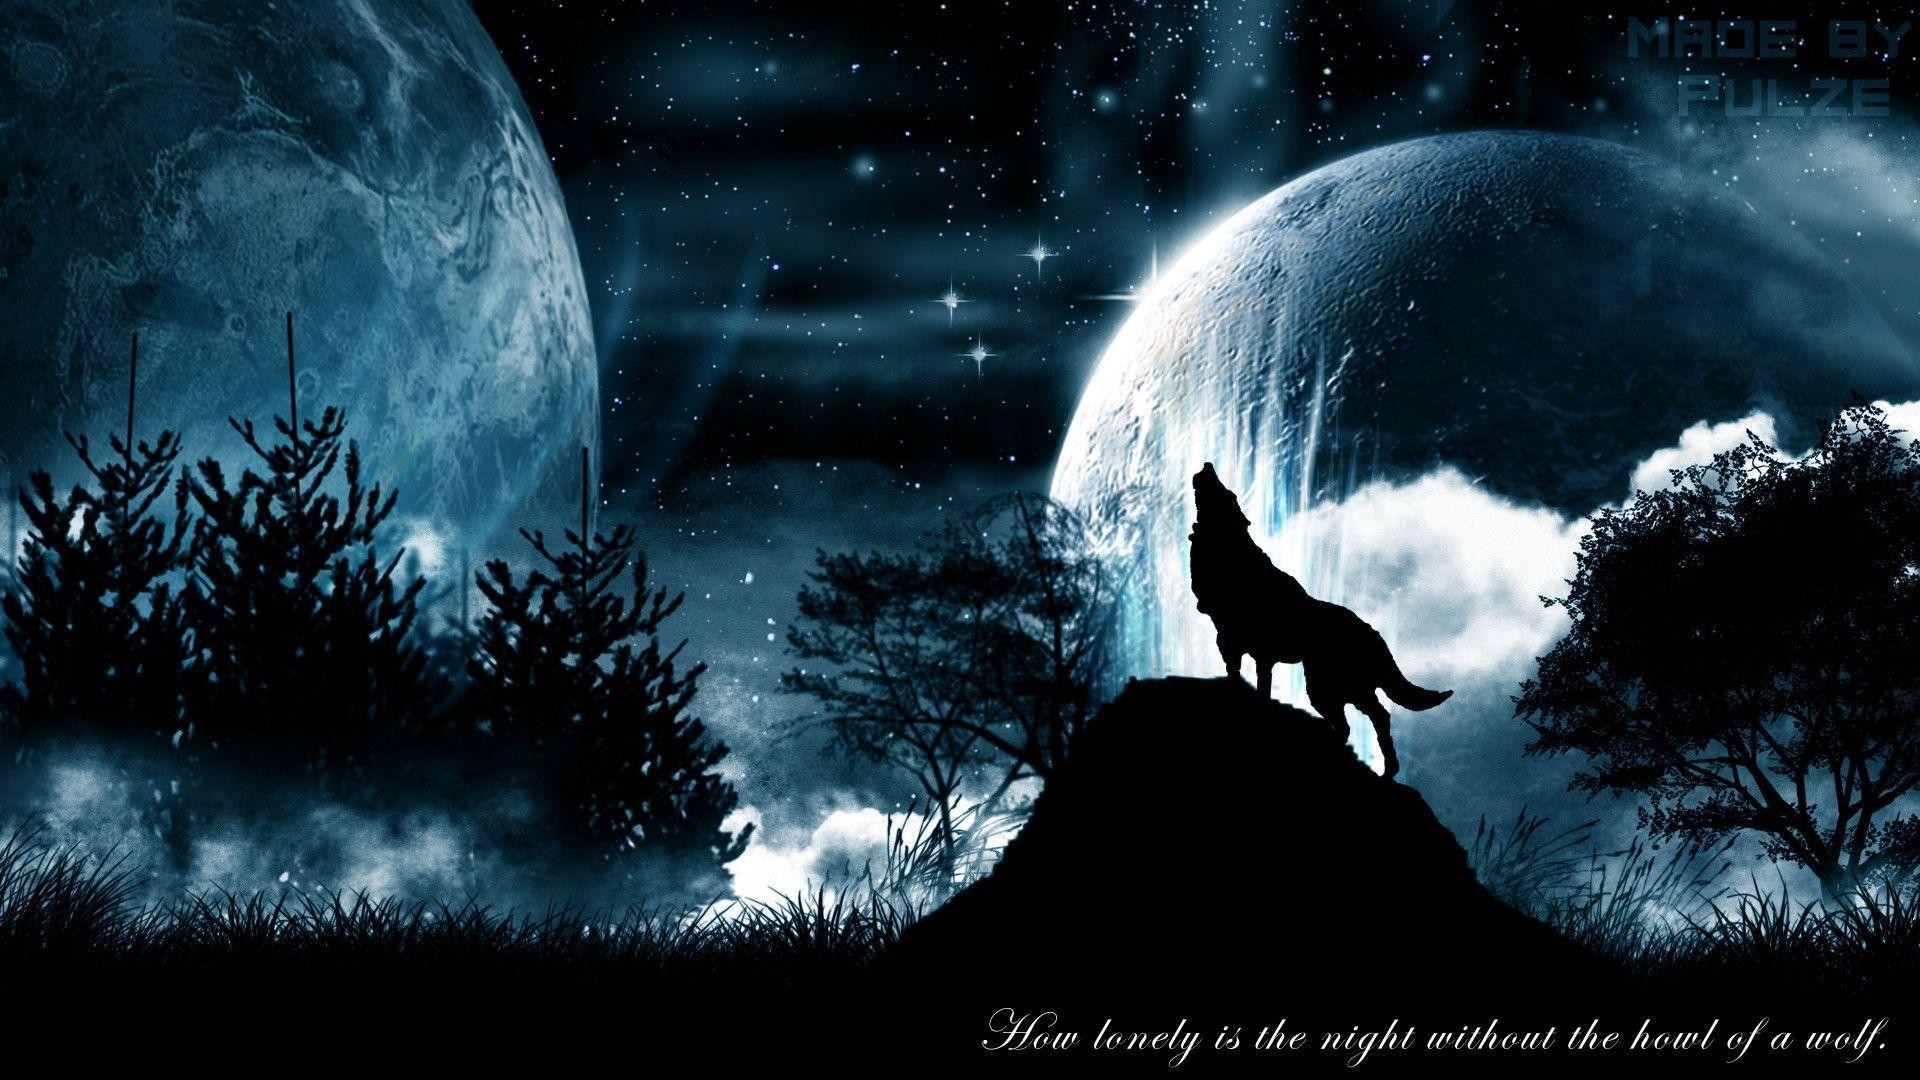 1920x1080 Related Pictures Wolf Wallpaper Howls At The Full Moon 1280x1024 .